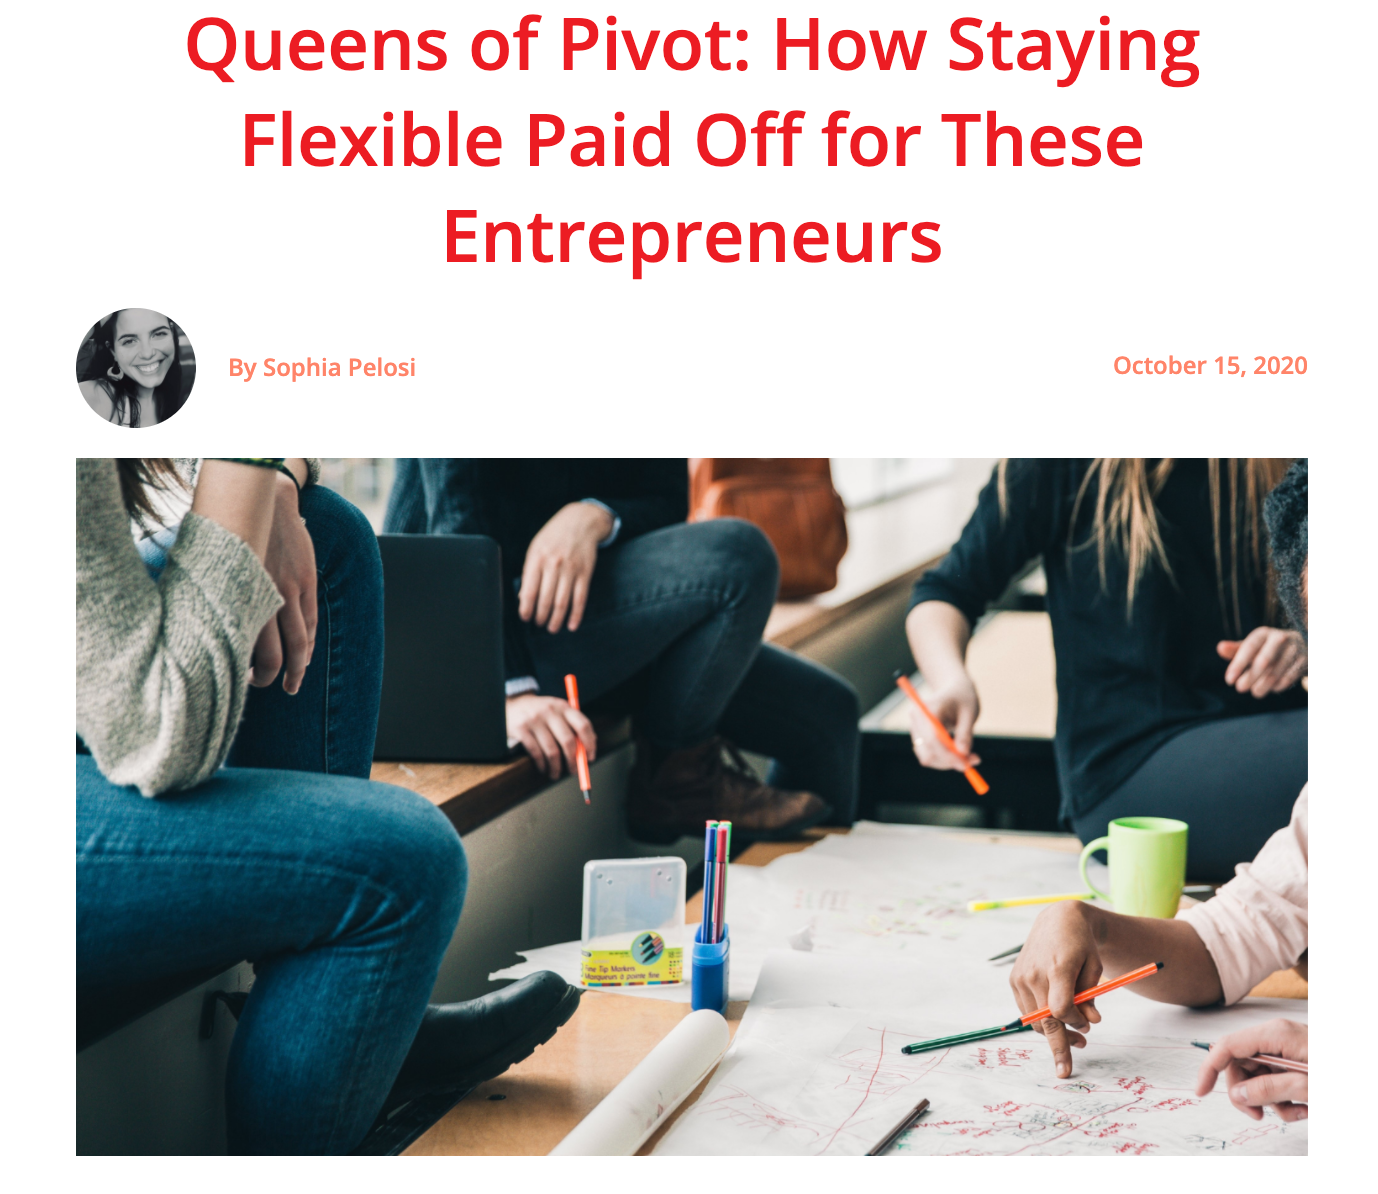 Queens of Pivot:  How Staying Flexible Paid Off for These Entrepreneurs